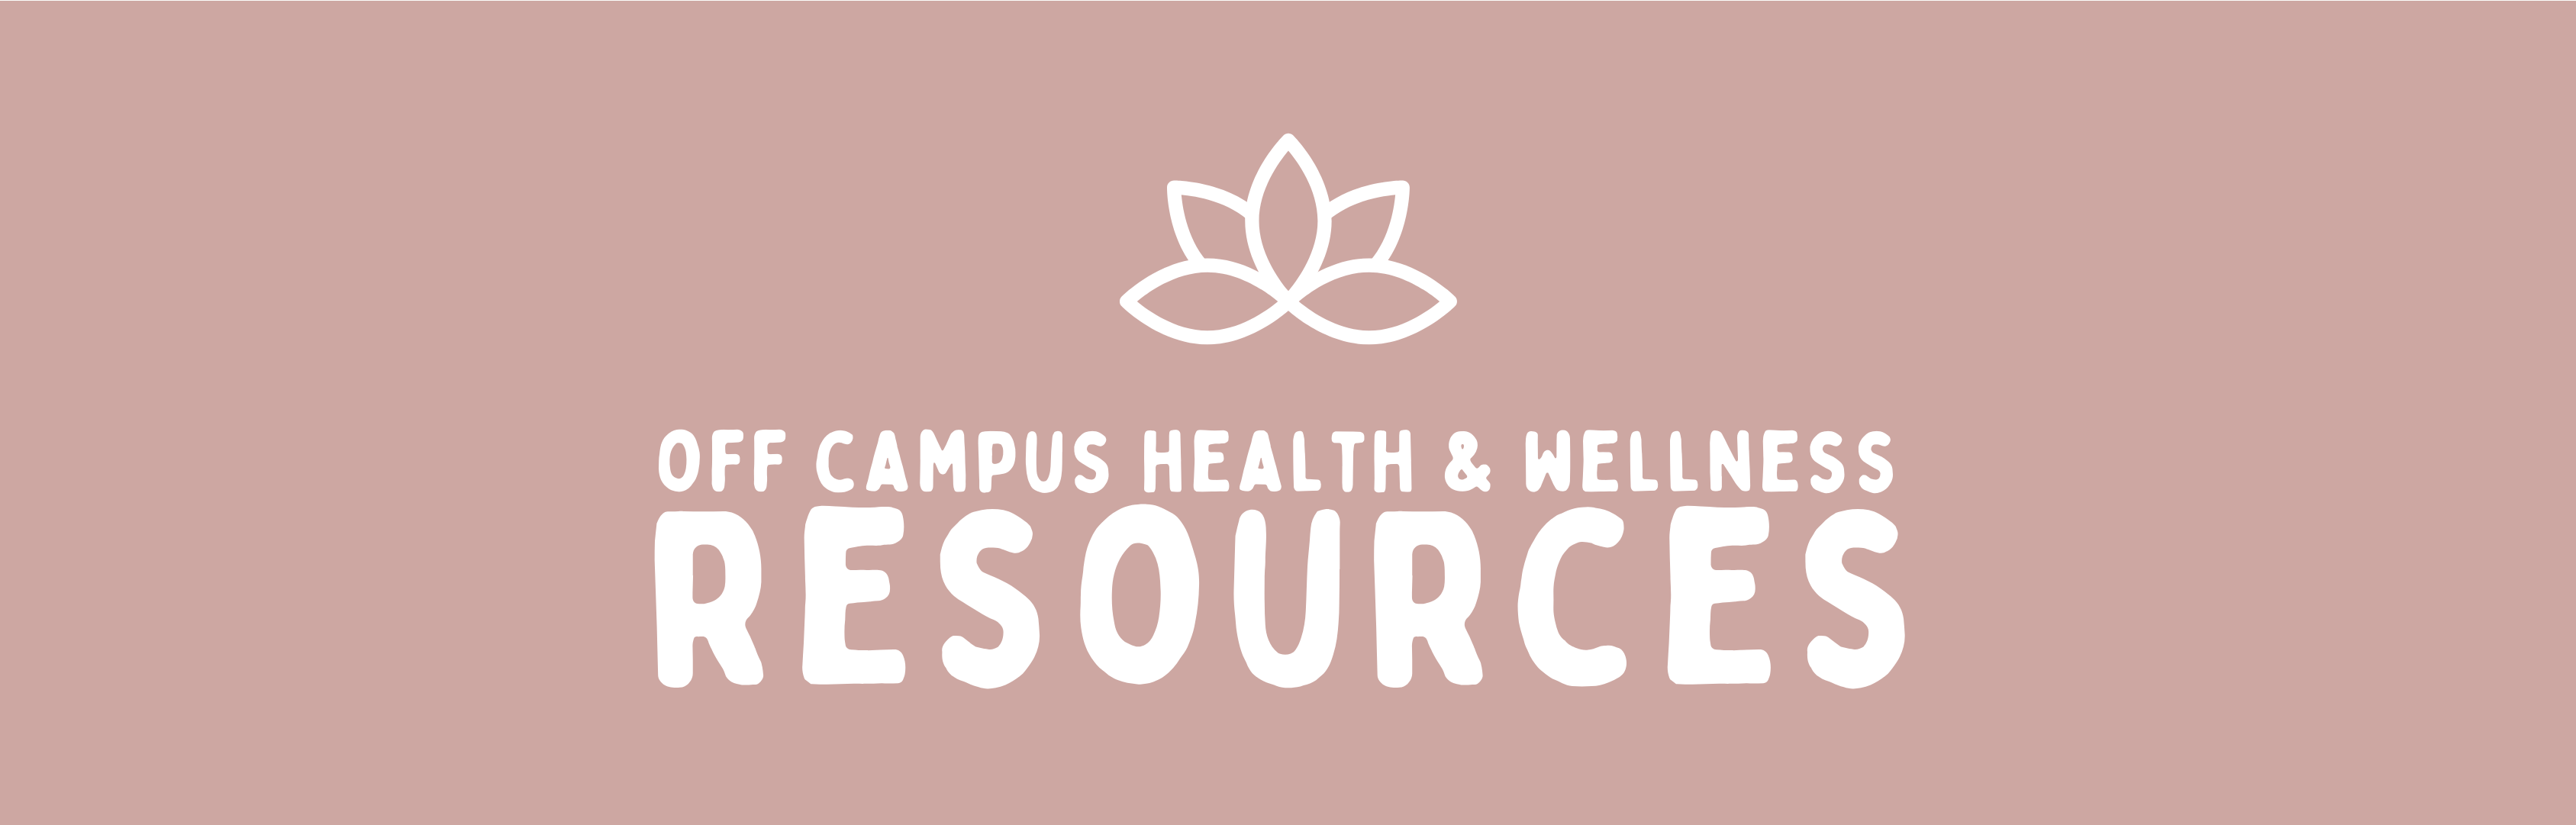 Graphic of Off-Campus Health & Wellness Resources